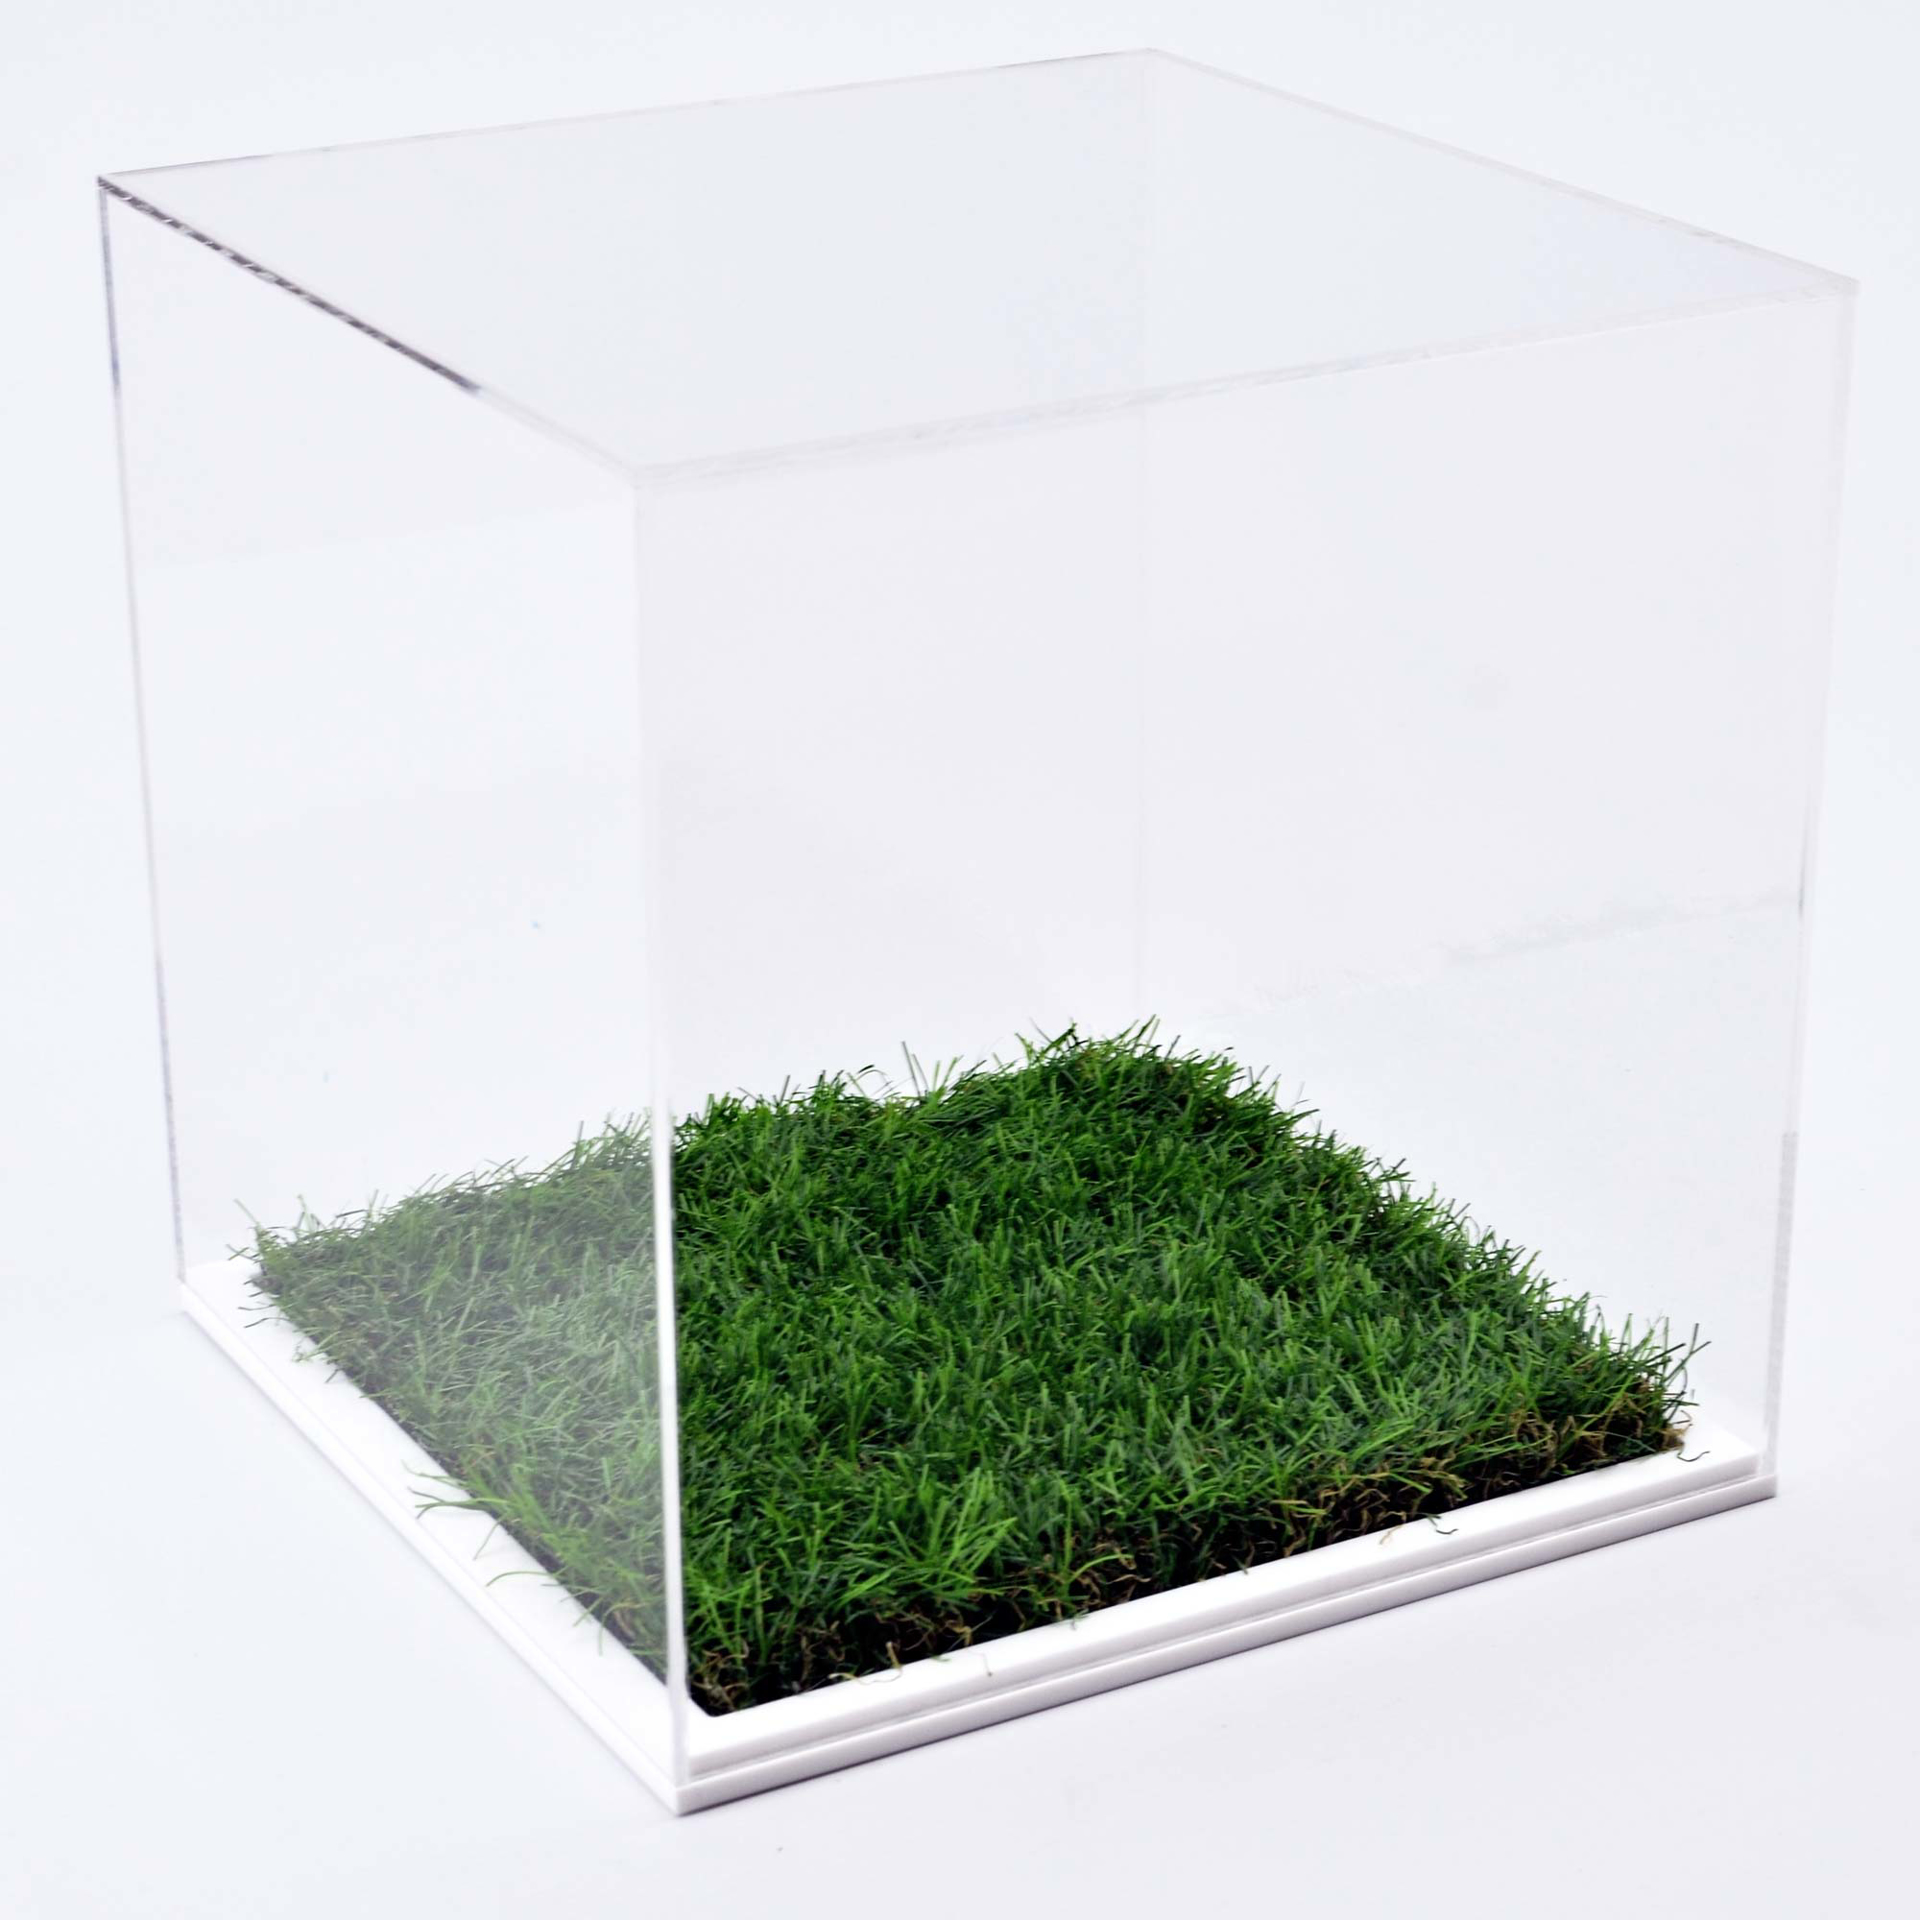 Acrylic Football Display Case with grass base